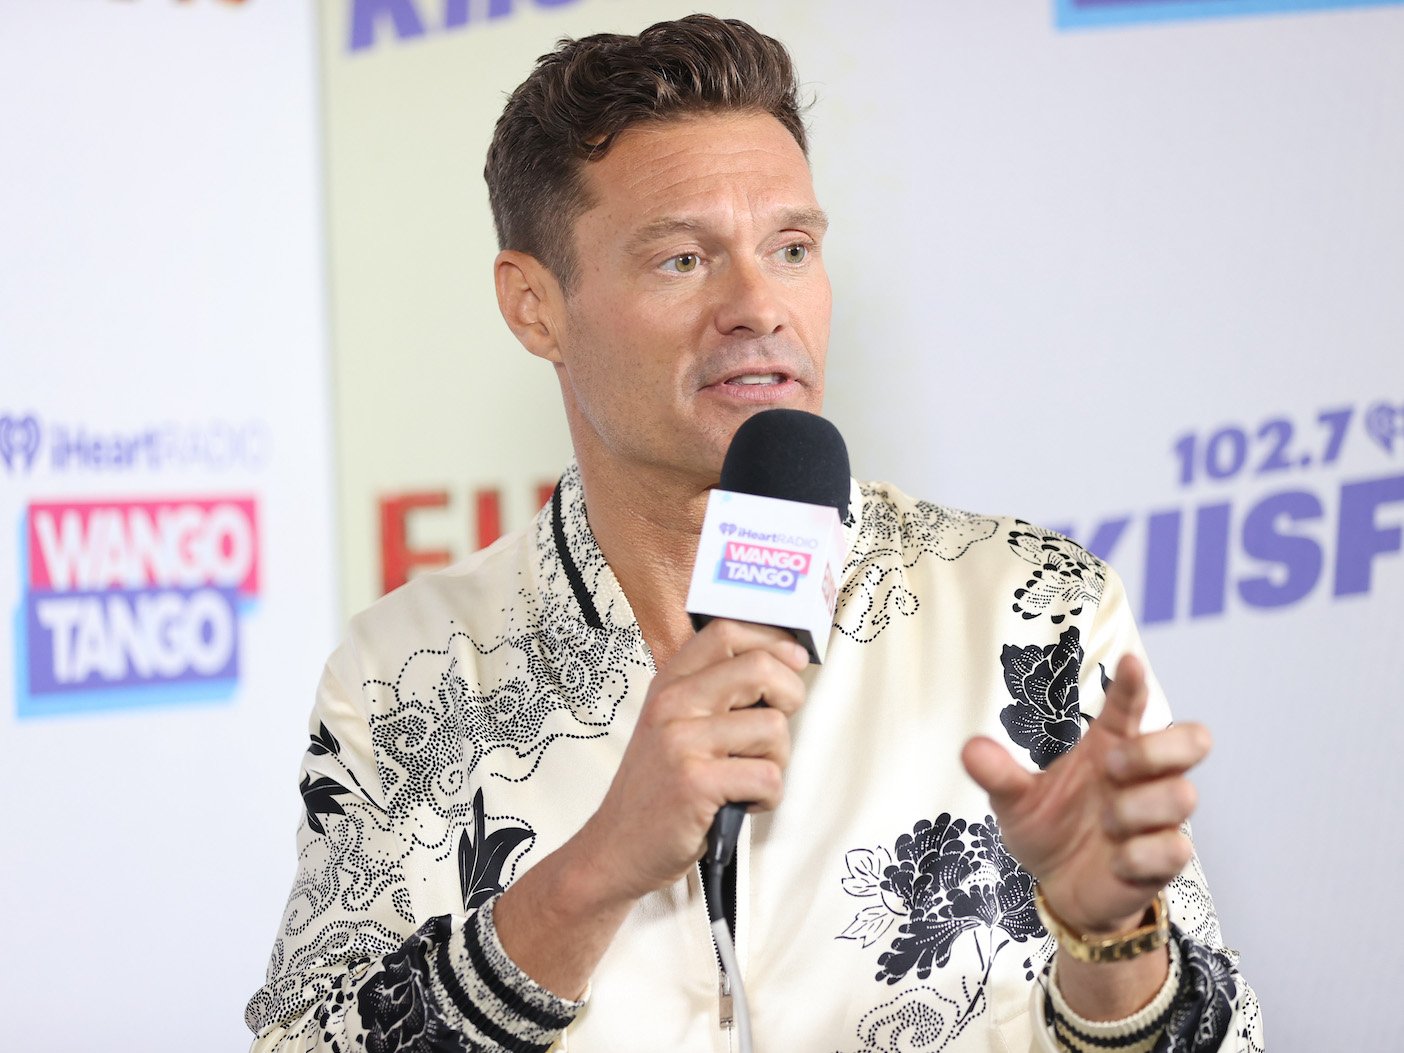 Sketchy Source claims Ryan Seacrest was rejected by a younger actress last year